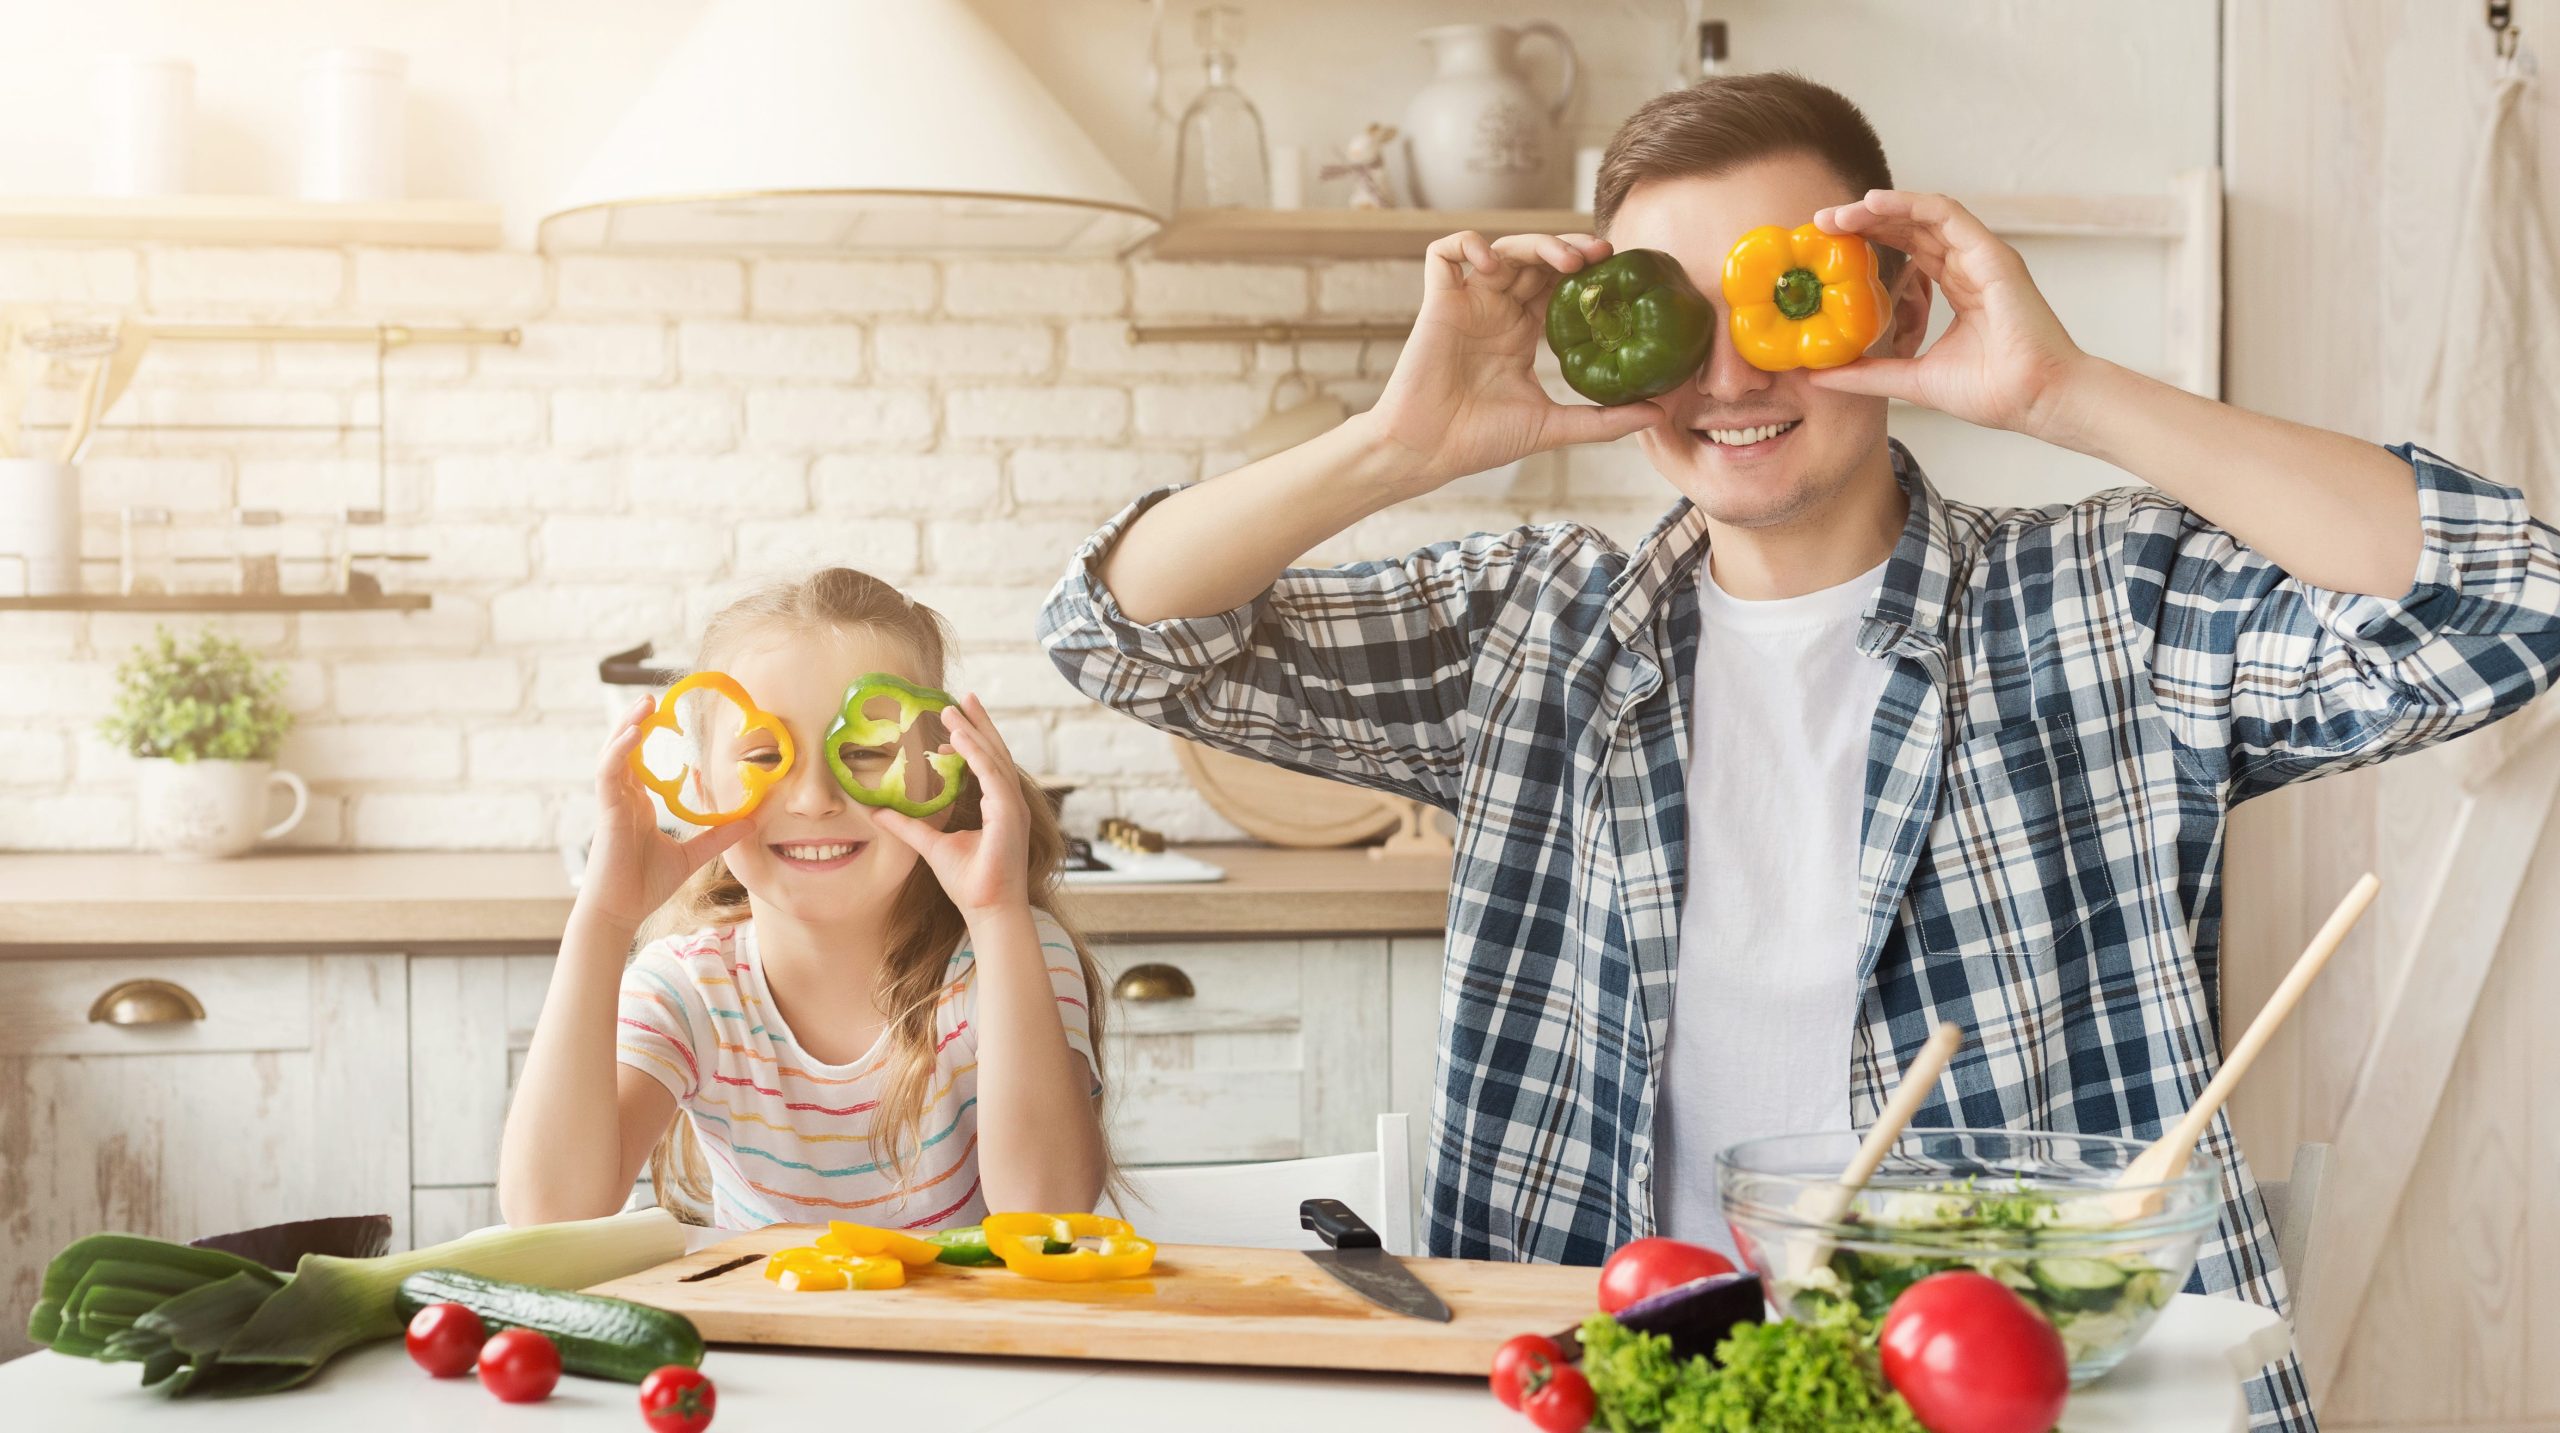 Healthy Foods for Your Family